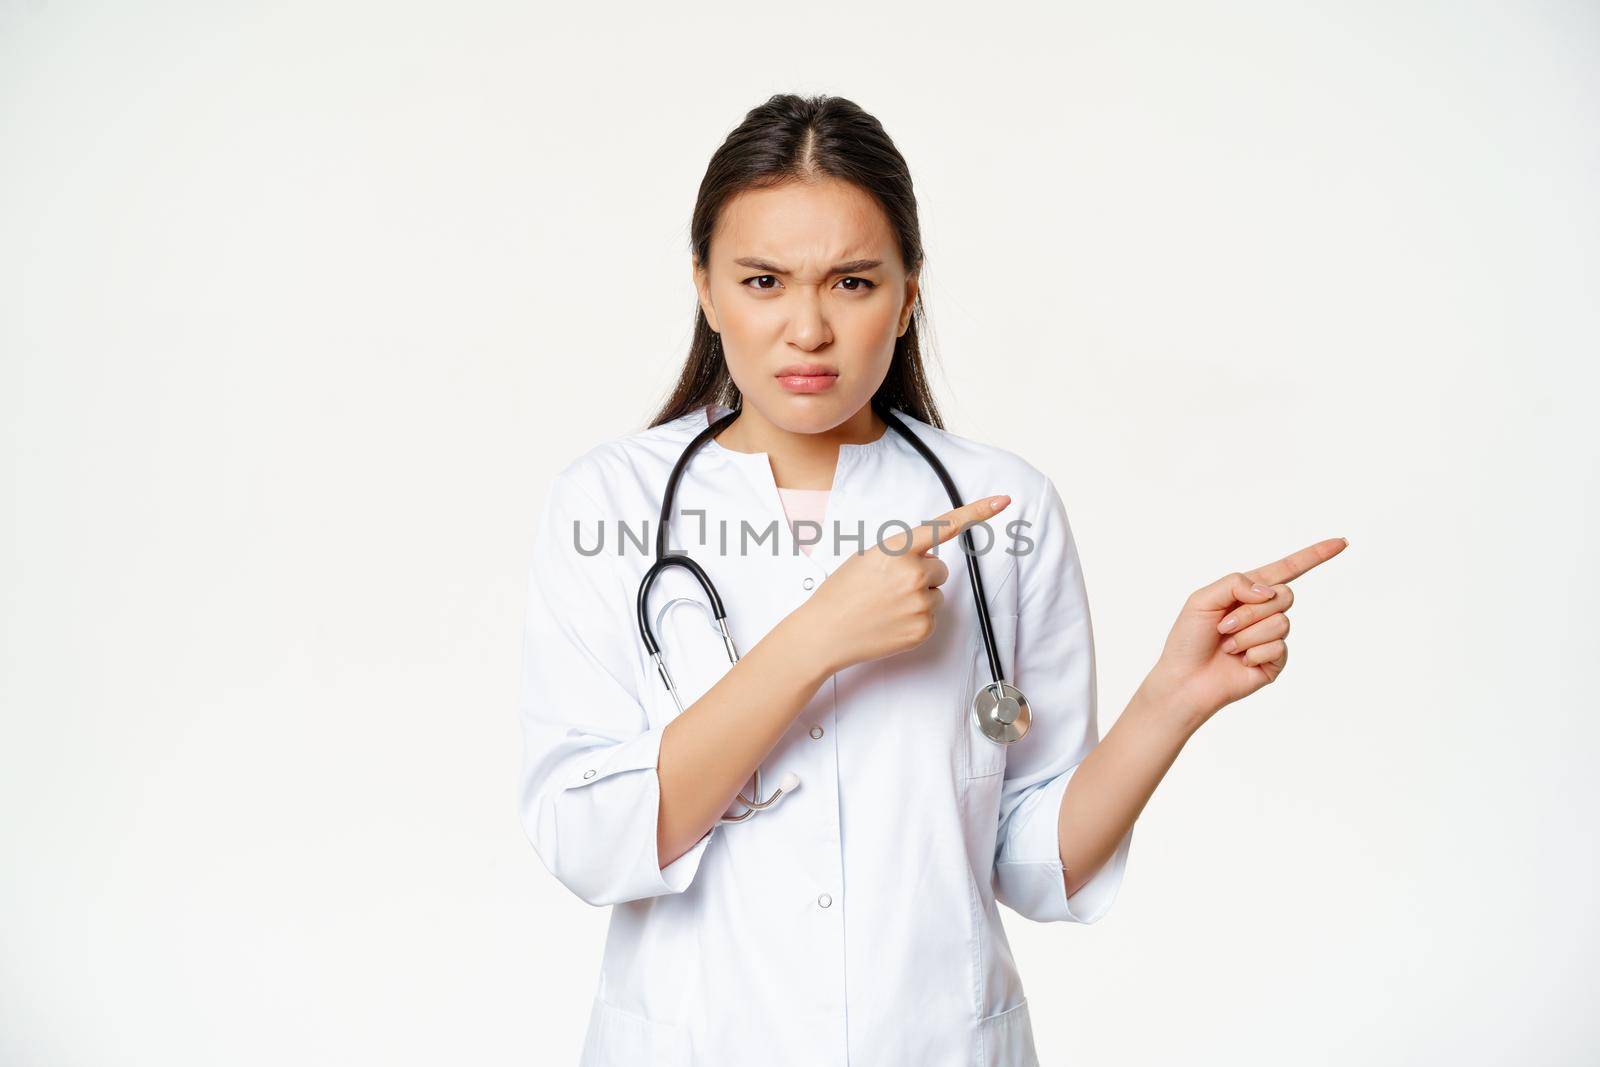 Angry female doctor, asian physician in medical robe and stethoscope, pointing fingers right and frowning furious, staring disappointed, white background.